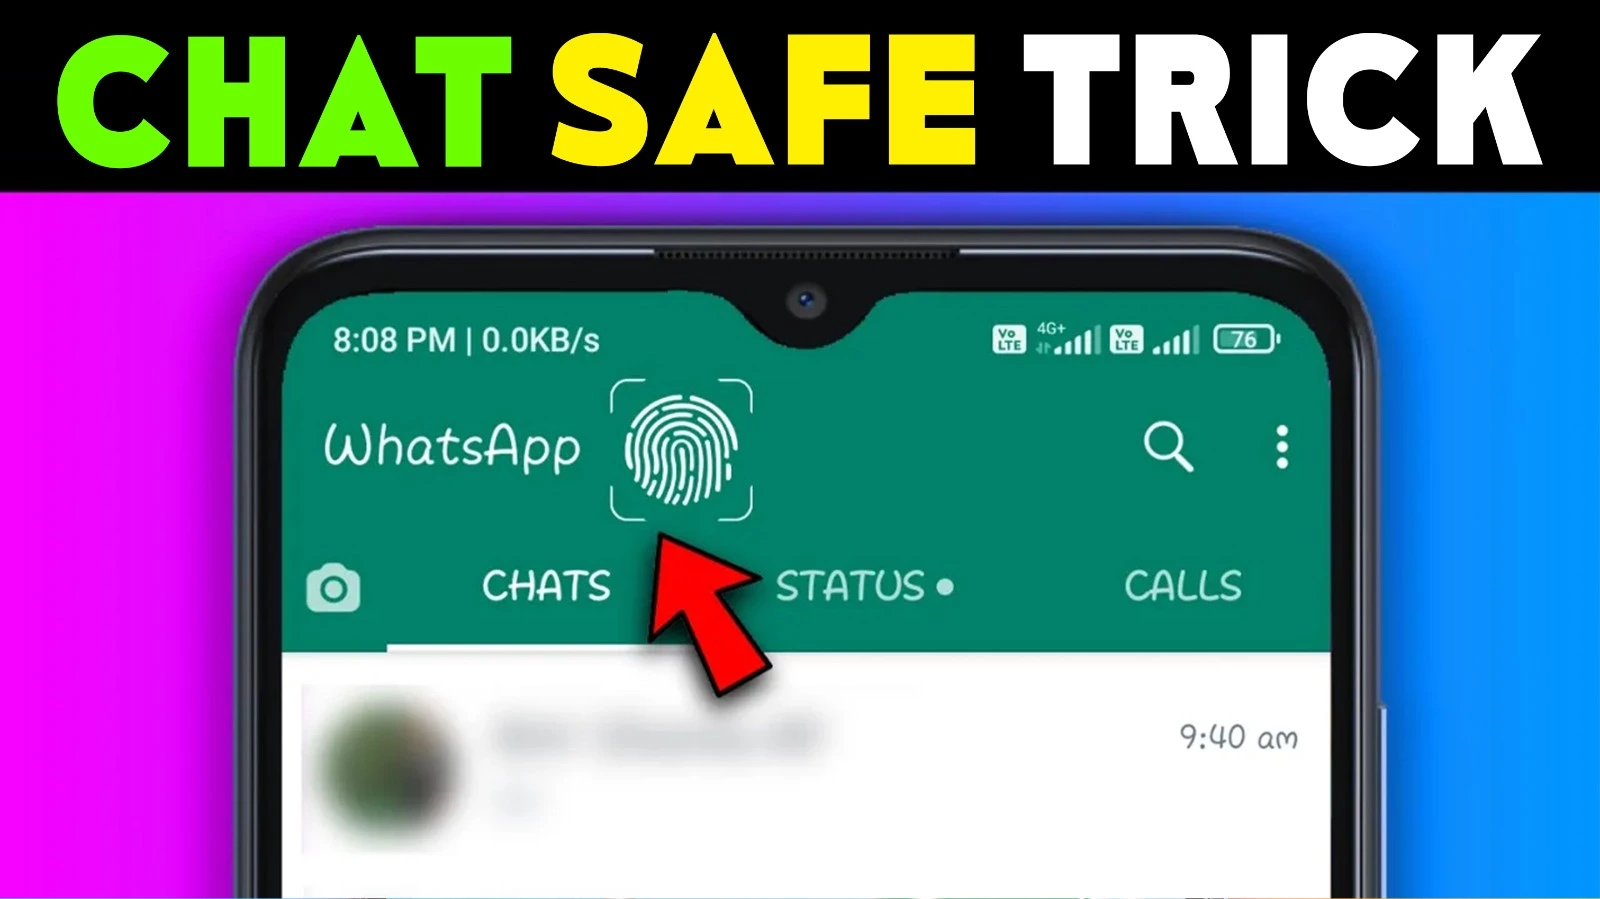 What Is Lock in WhatsApp Chats